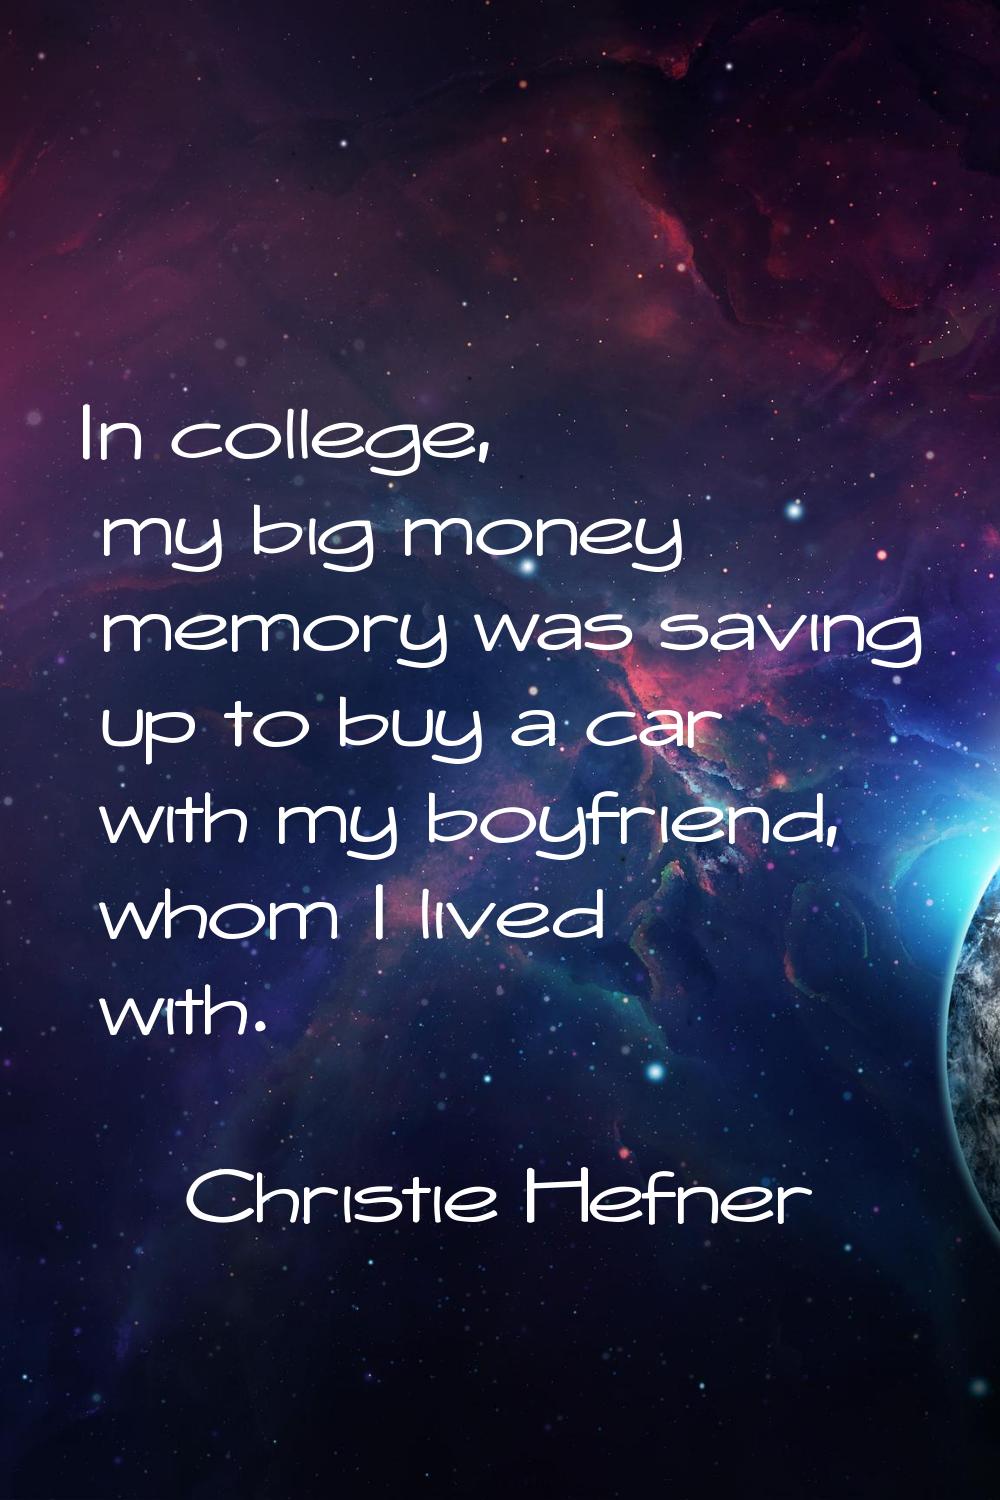 In college, my big money memory was saving up to buy a car with my boyfriend, whom I lived with.